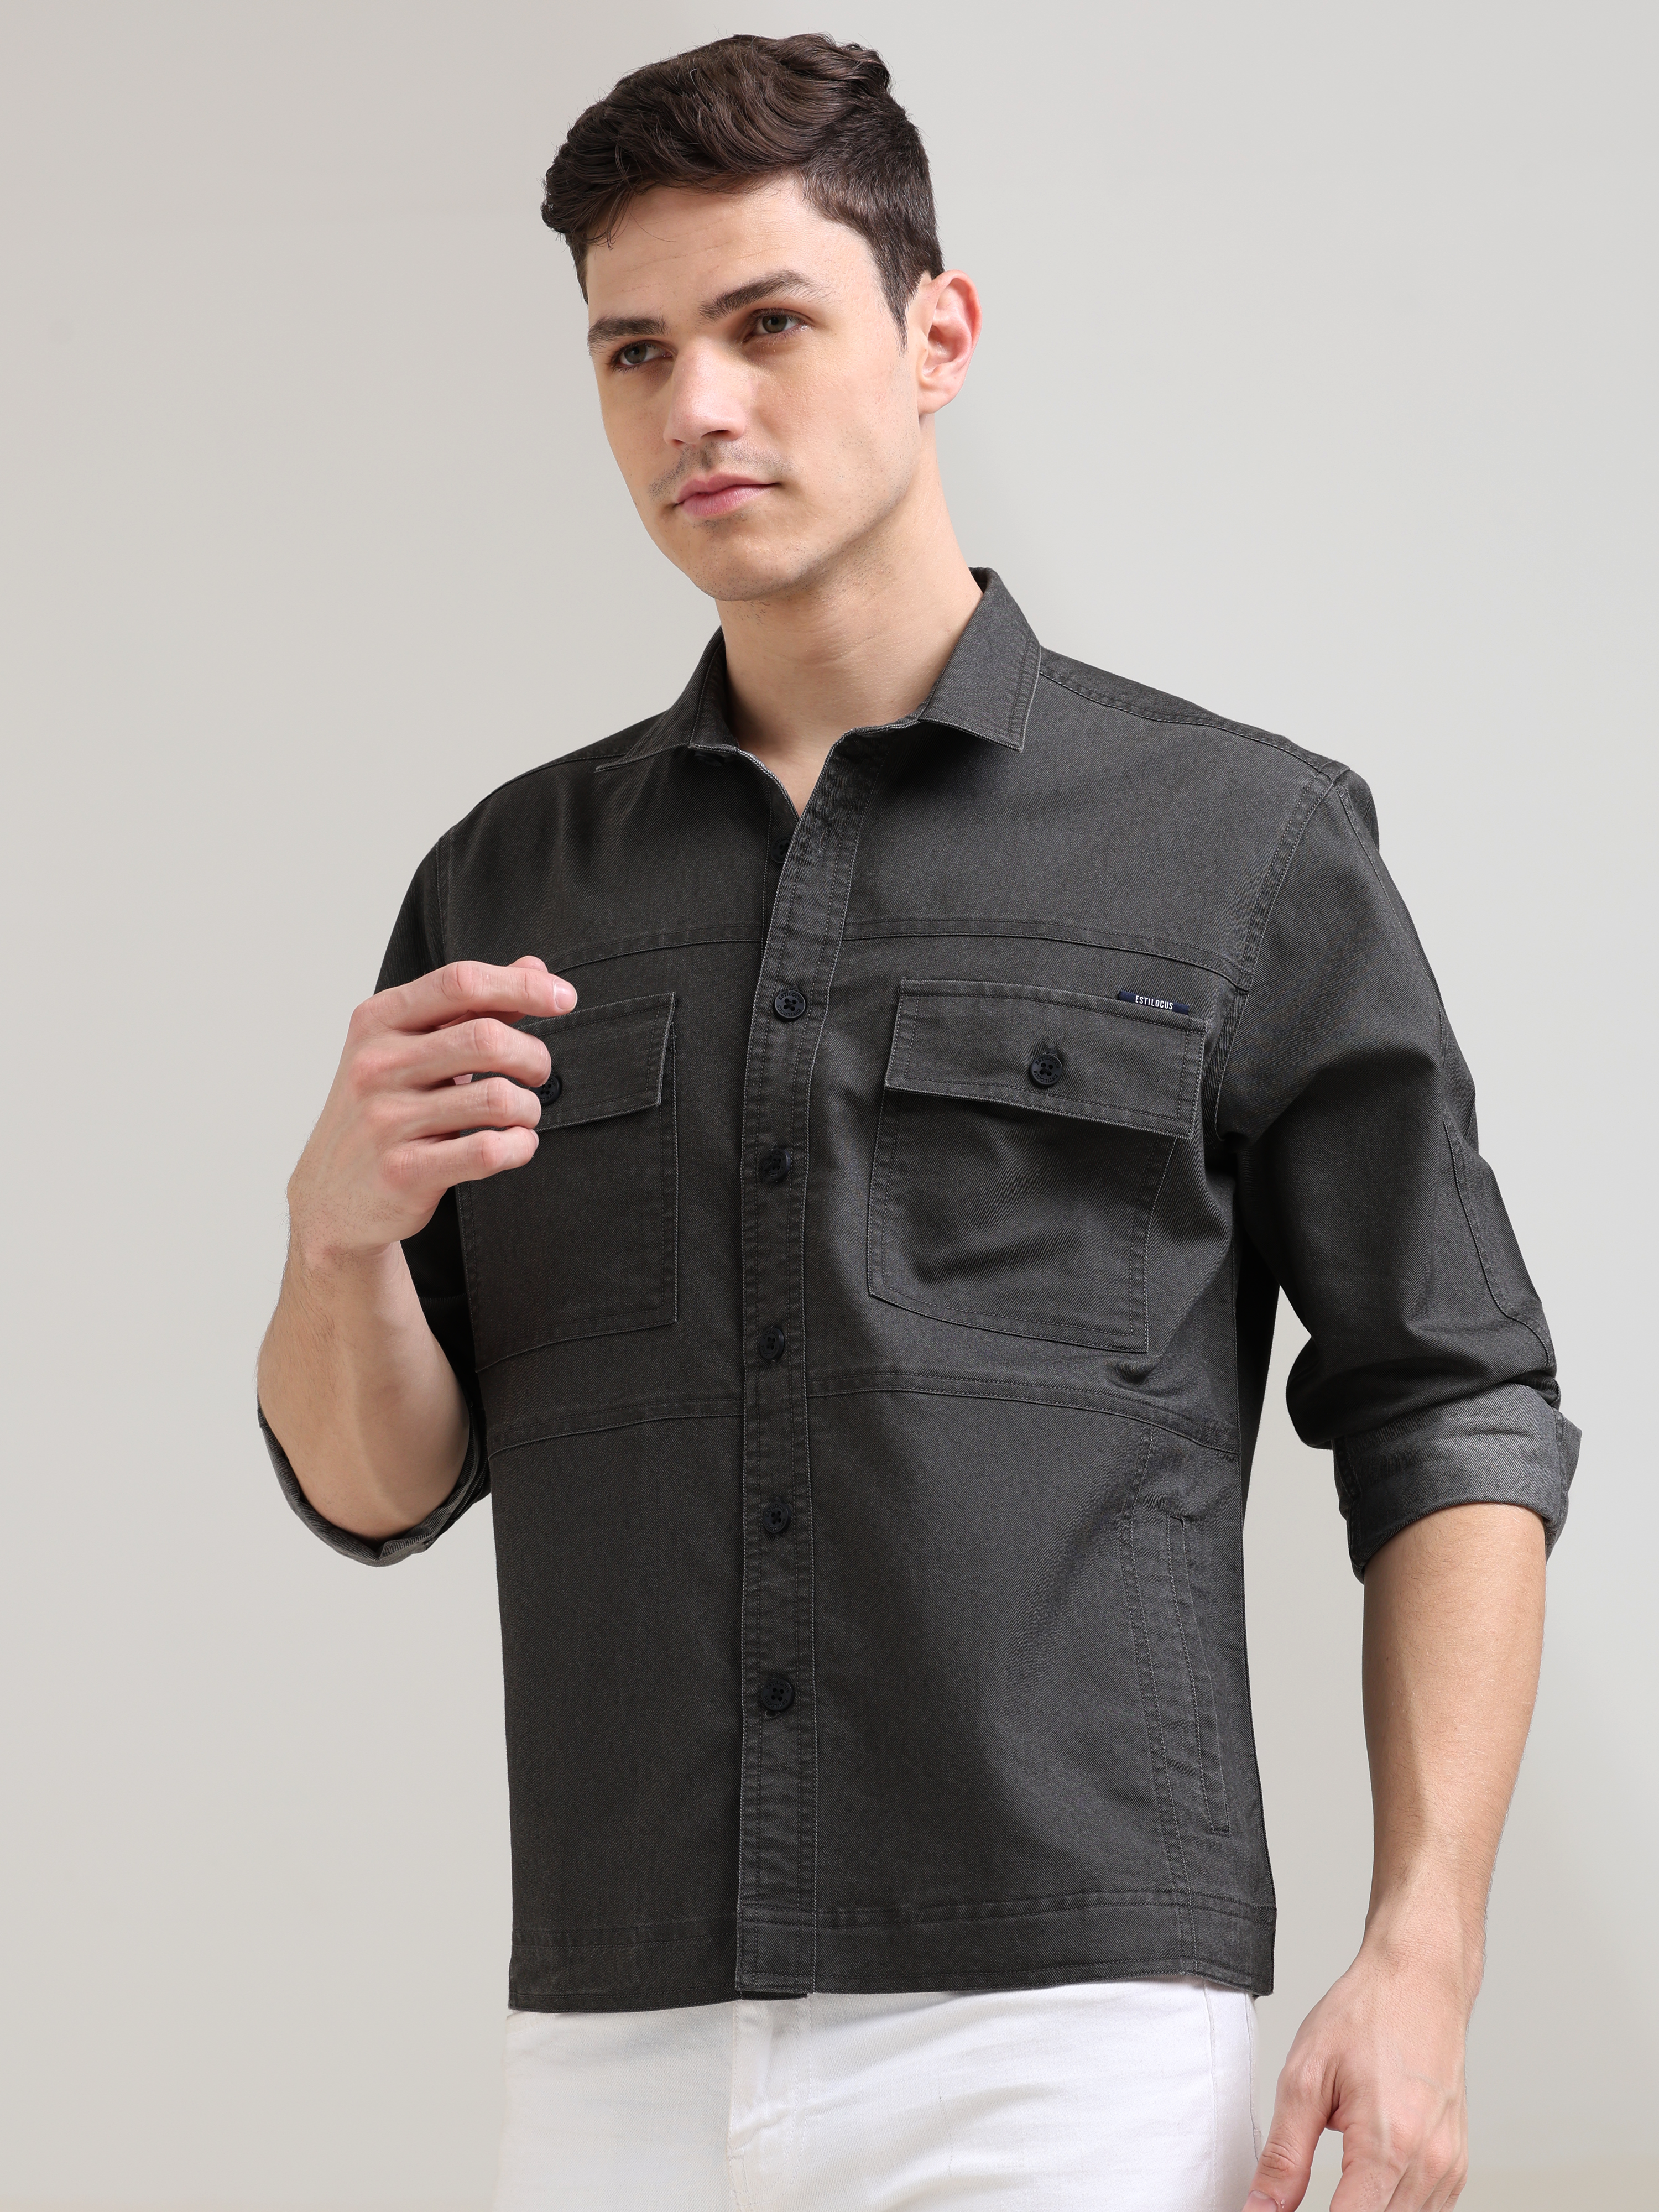 Charcoal Gray Denim Shirt shop online at Estilocus. 100% premium Denim Full-sleeve shirt Cut and sew placket. Regular collar Double button edge cuff Double pocket, other end with flap pocket Curved bottom hemline HD elegant print at panal All Double needl